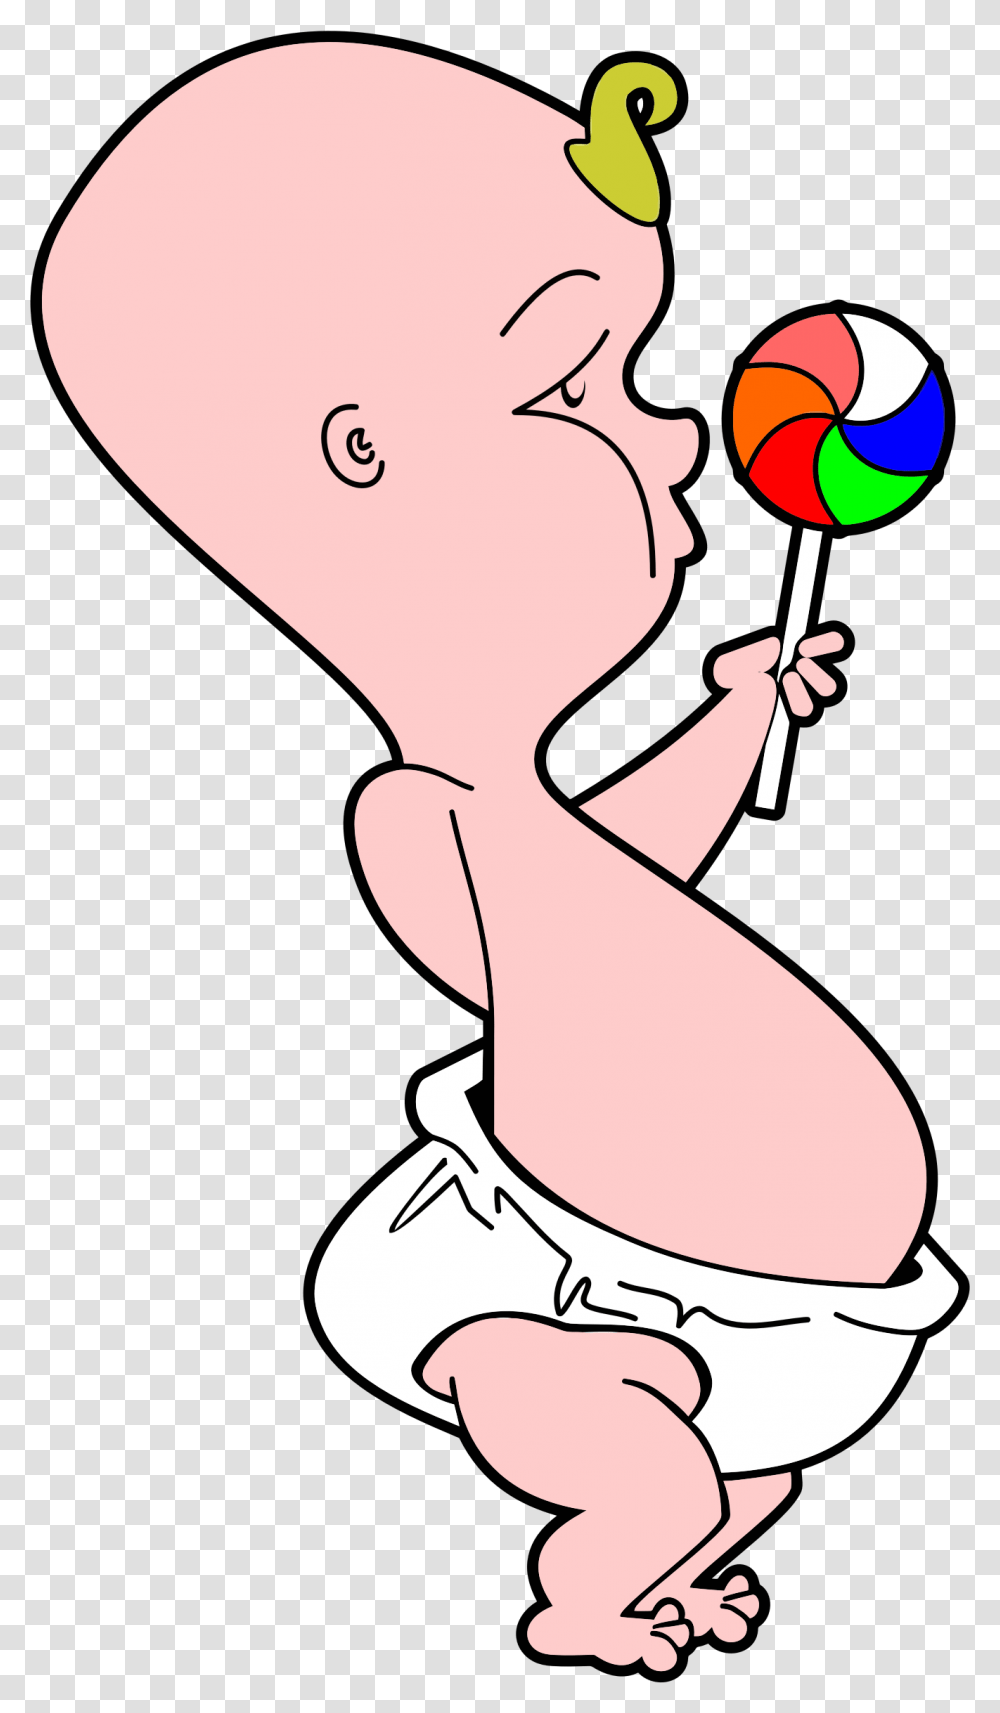 Baby With Pinwheel Lollipop Clip Arts Cartoon Baby With Candy, Food, Head, Kneeling Transparent Png